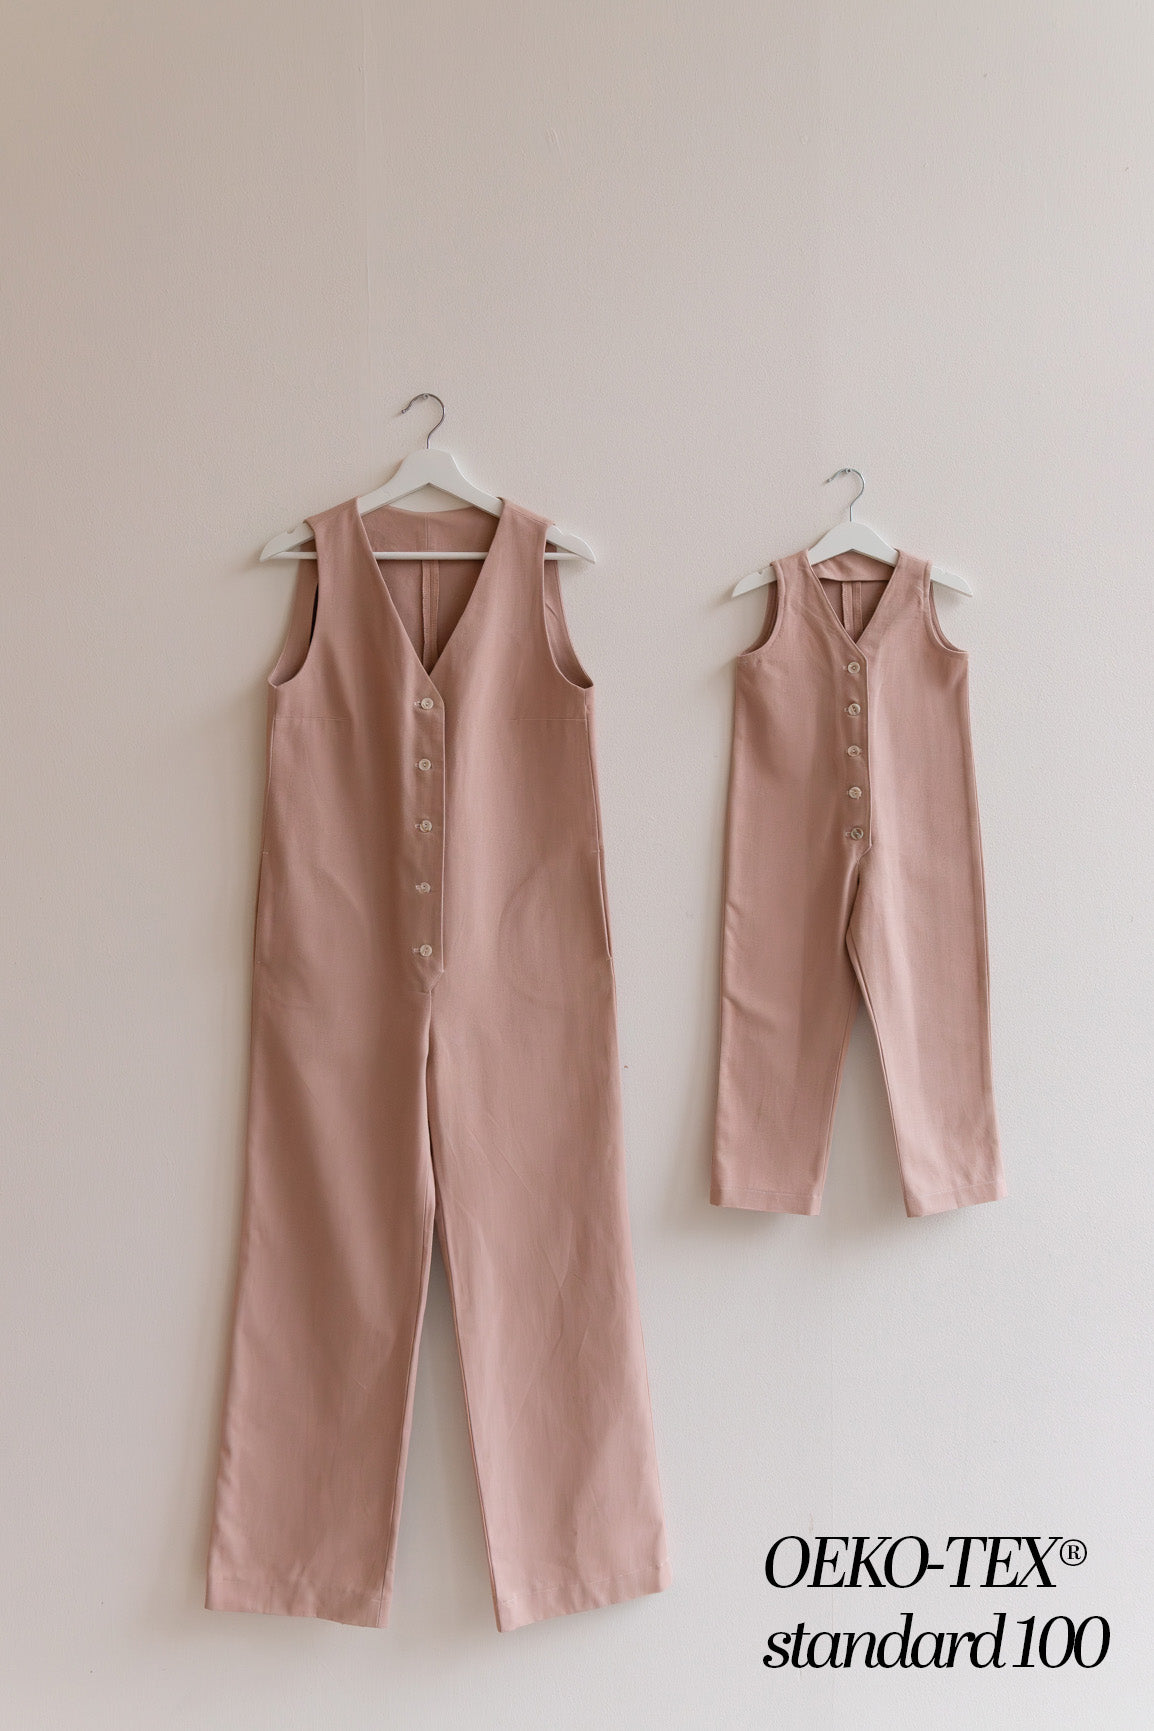 soft pink pastel pink tea rose color Kids Mini Jumpsuit overall workwear cotton canvas 5 buttons v-neck OEKO-TEX sustainable clothes handmade